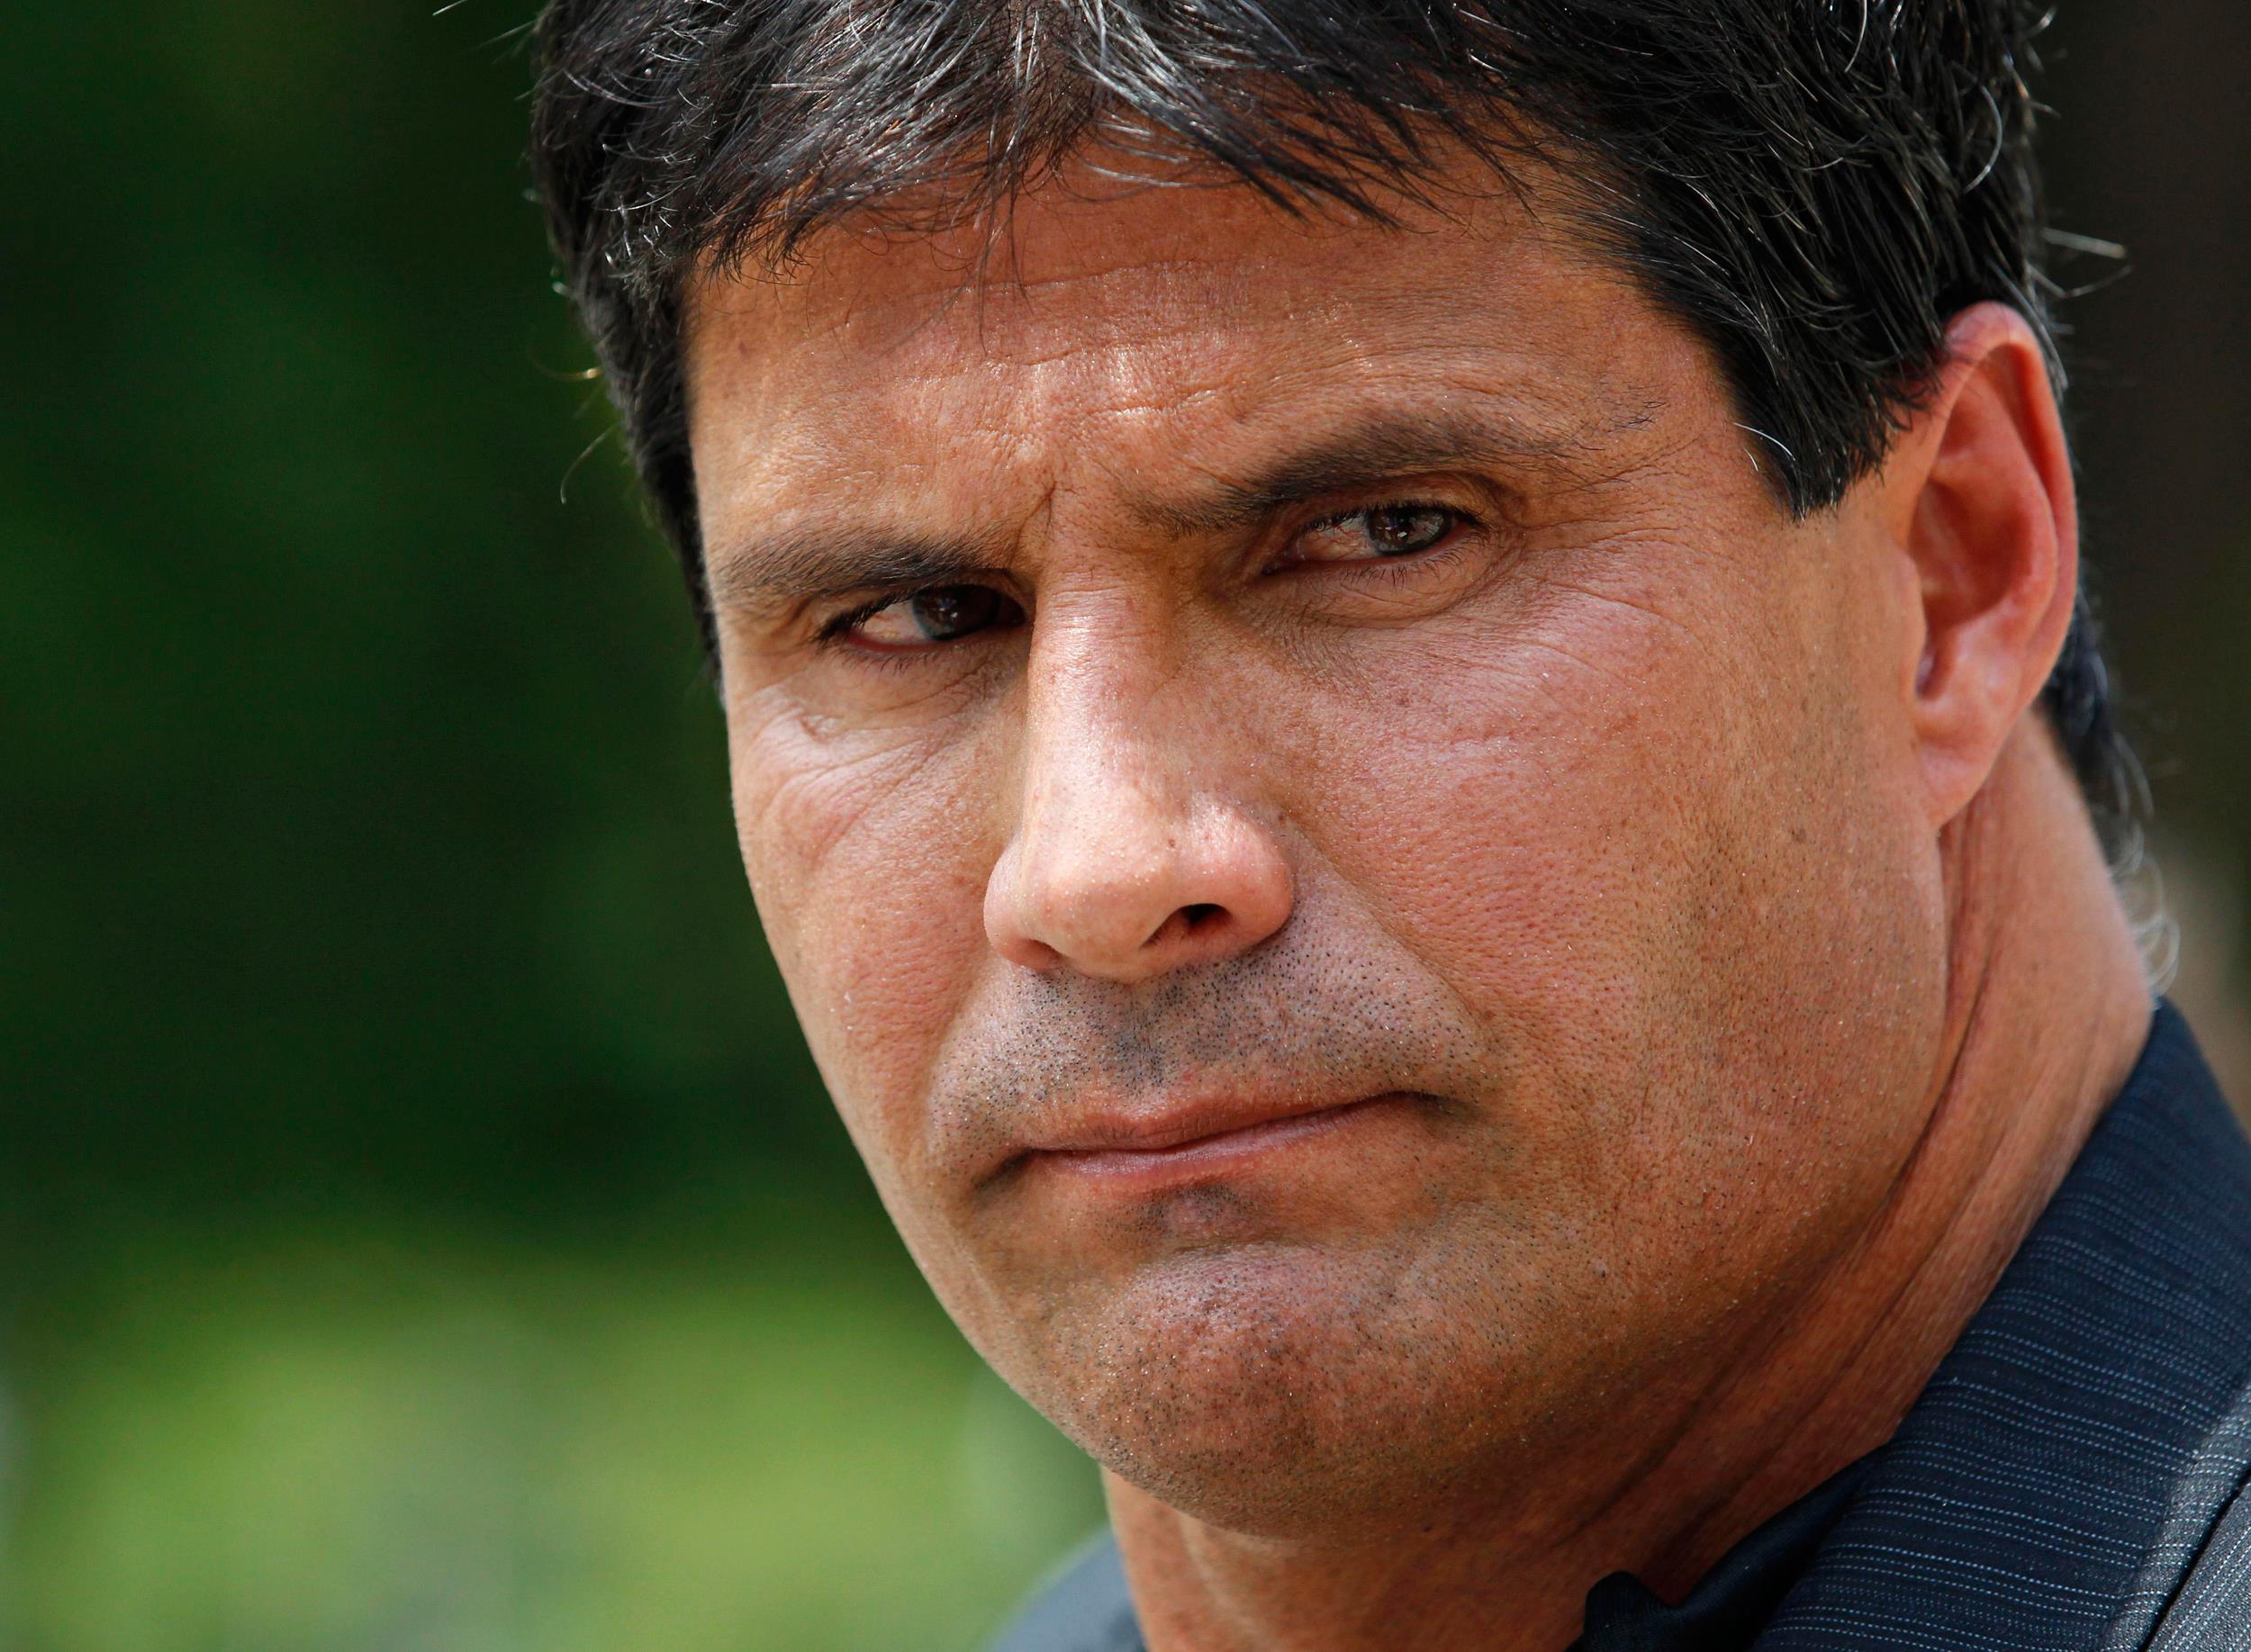 Jose Canseco Gives Poker Tournament the Finger